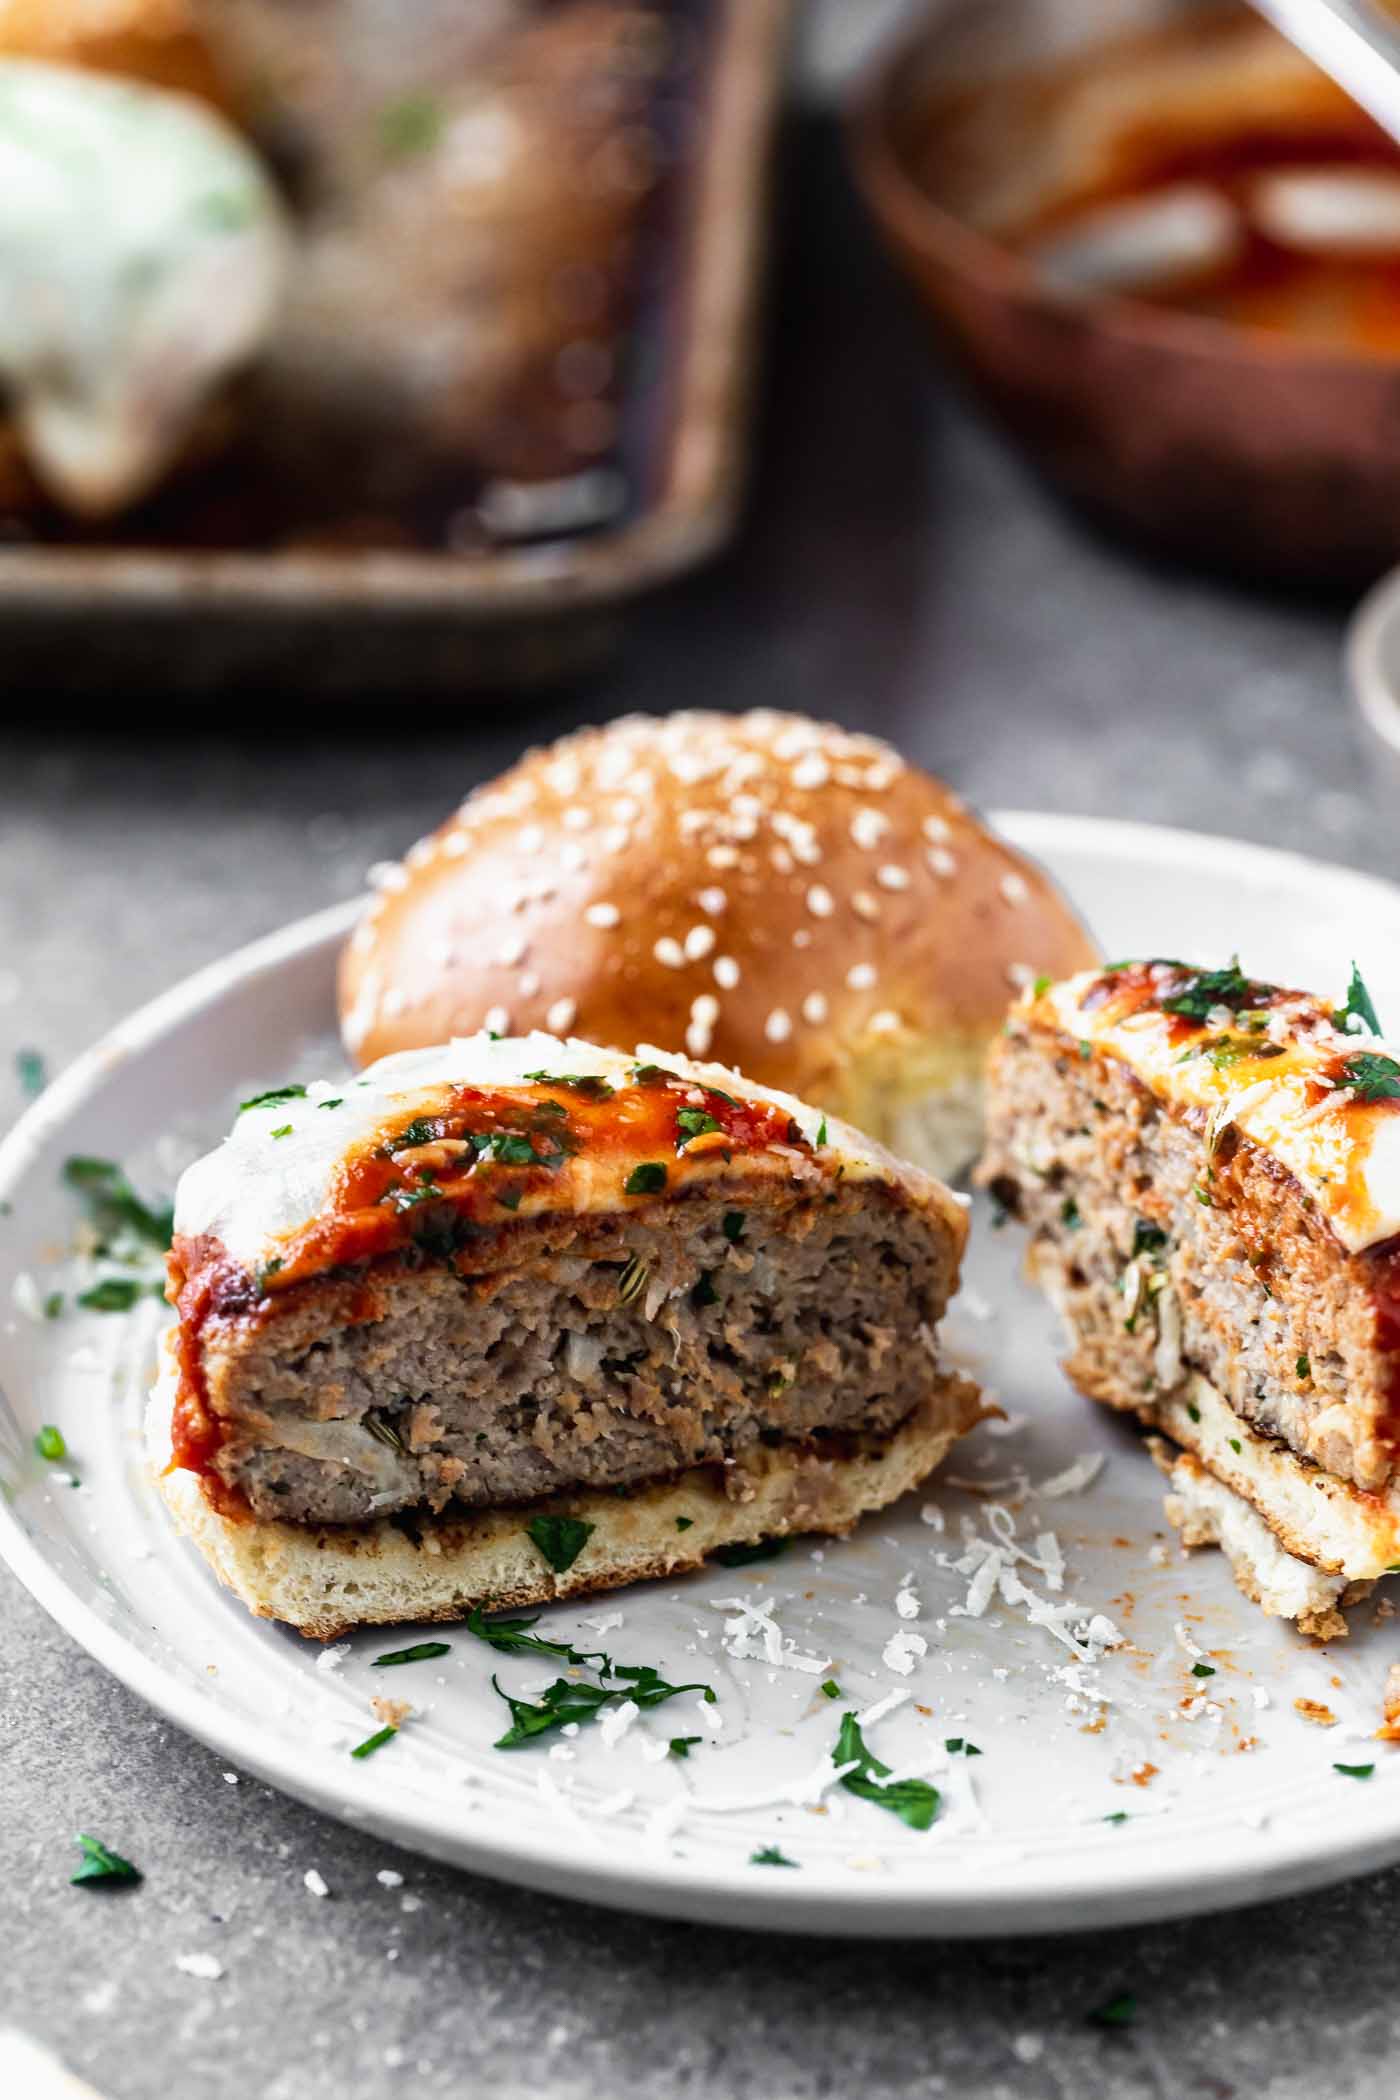 Turkey Meatball Burger Melts are basically a tender, moist, and FLAVORFUL meatball transformed into a burger. The 